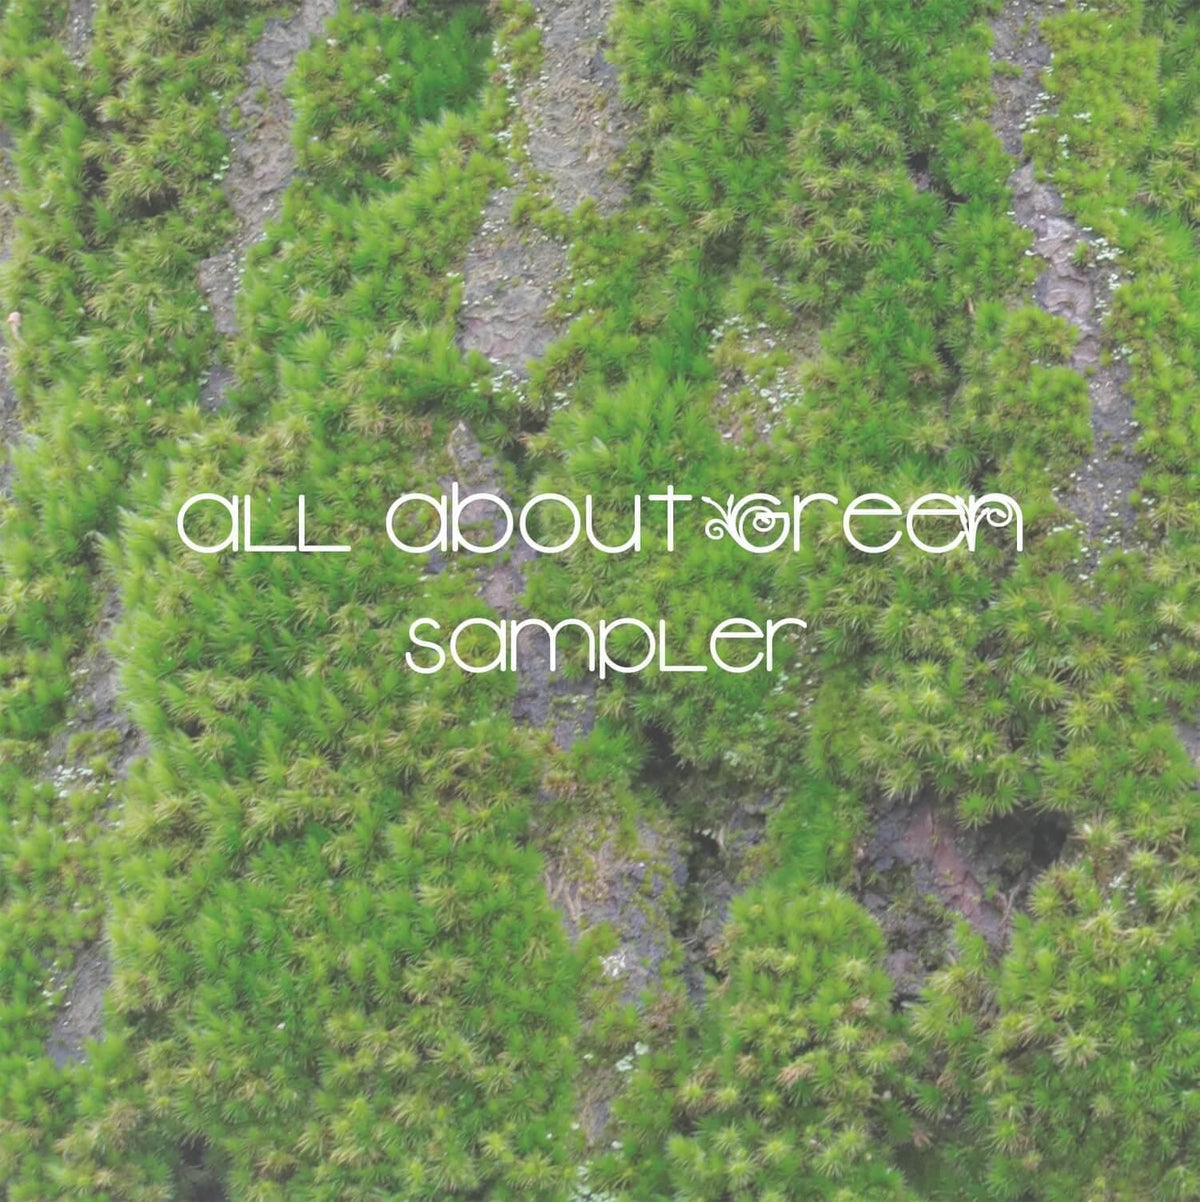 All About Green Sampler